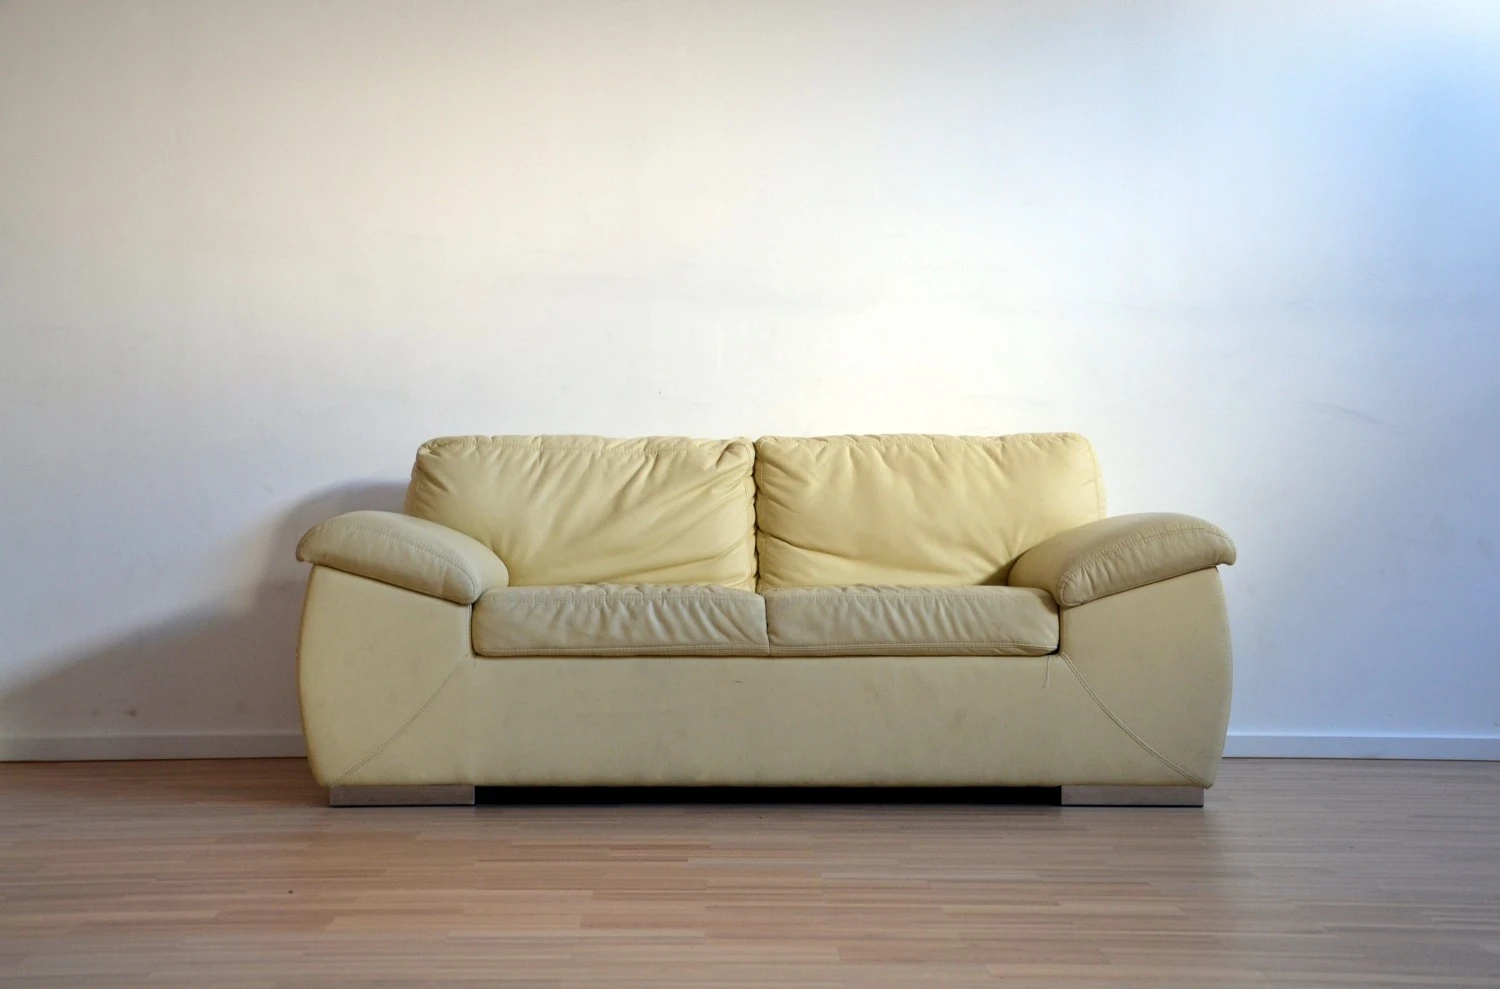 Guide on How to Move a Sofa